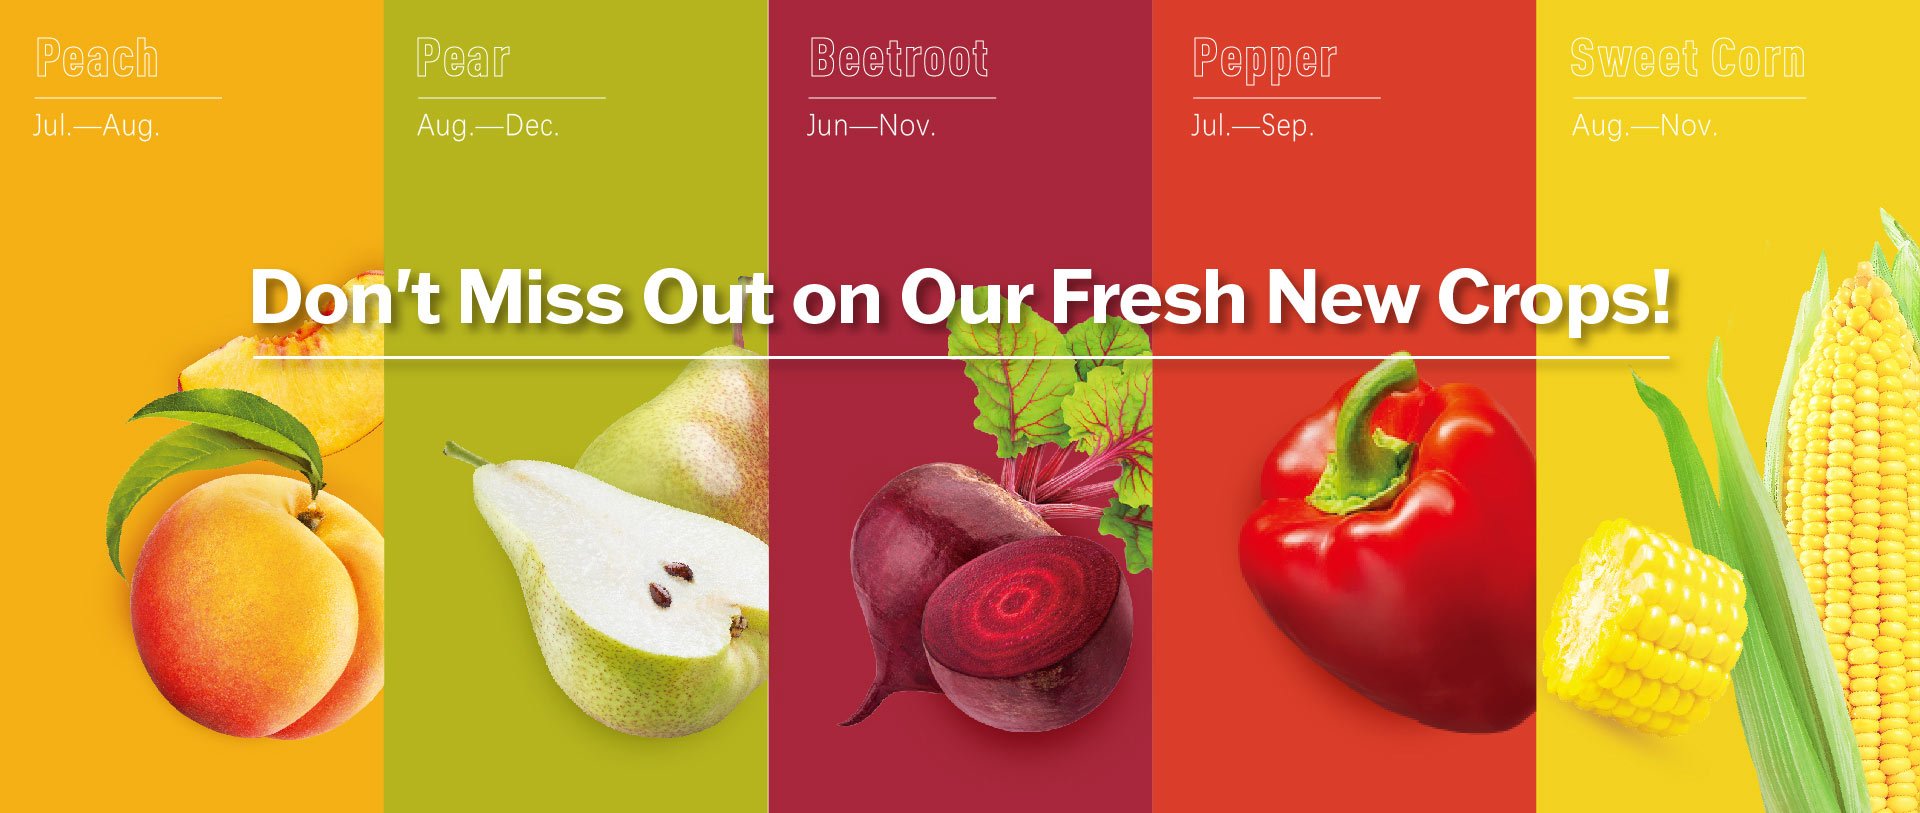 Don't Miss Out on Our Fresh New Crops!